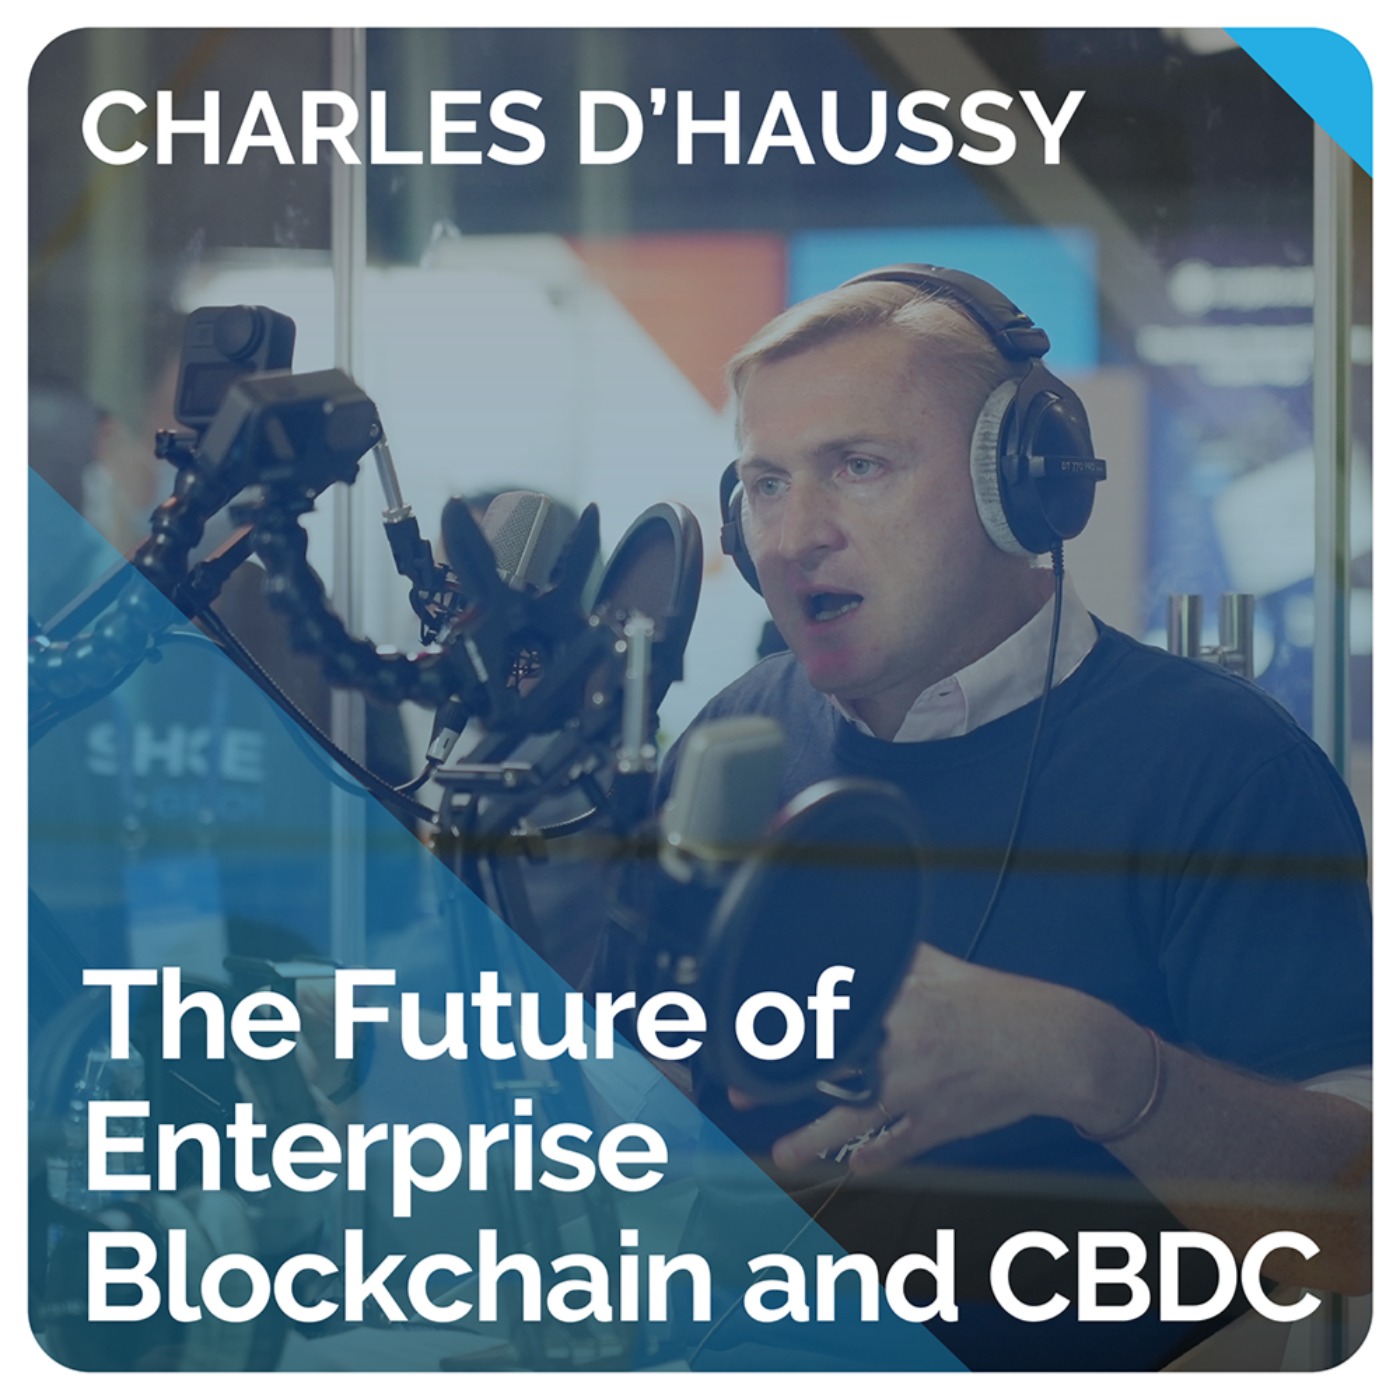 The Future of Enterprise Blockchain and CBDC (ft. Charles d’Haussy)